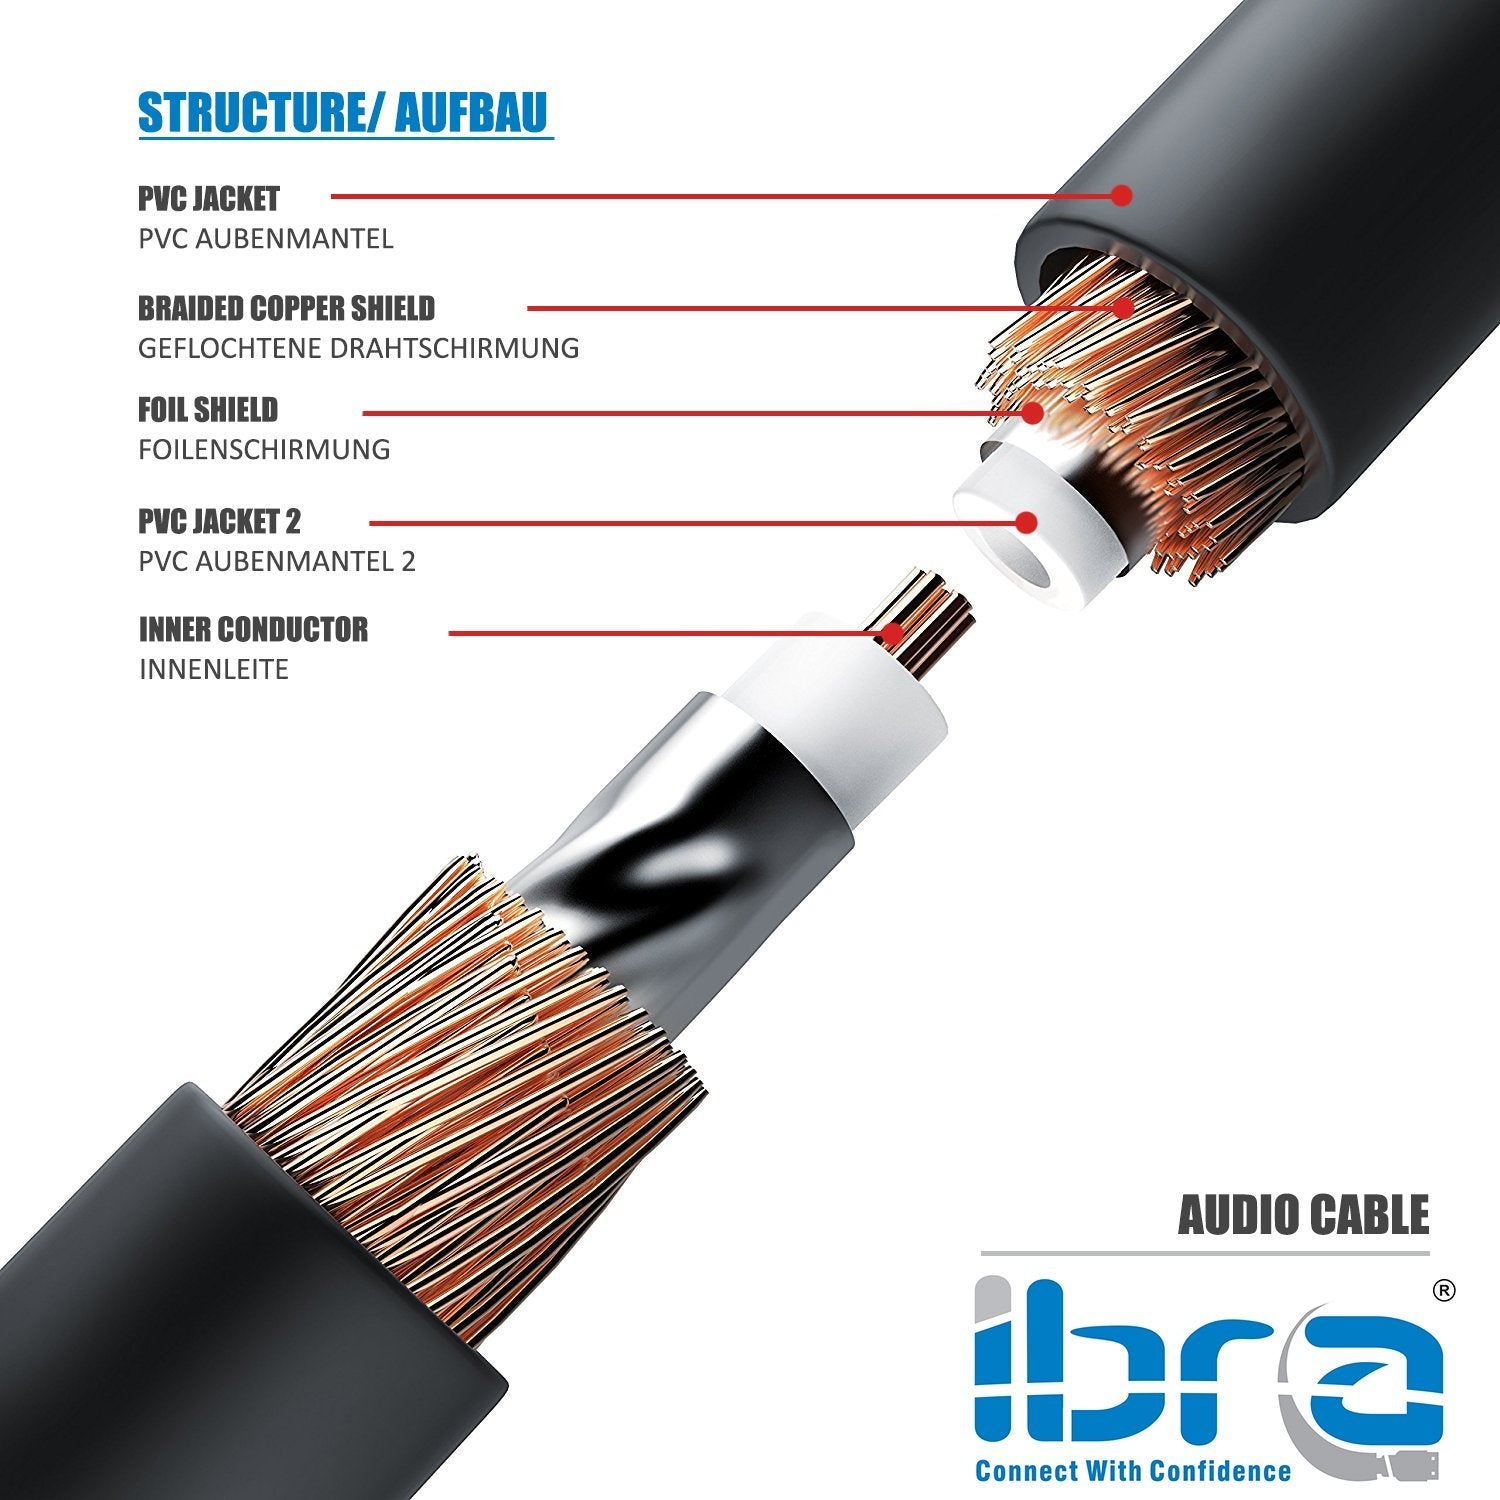 IBRA 0.5M Y Cable / Subwoofer Cable / Audio Cable / RCA Cable (1 x RCA to 2 x RCA) - GUN Metal Range